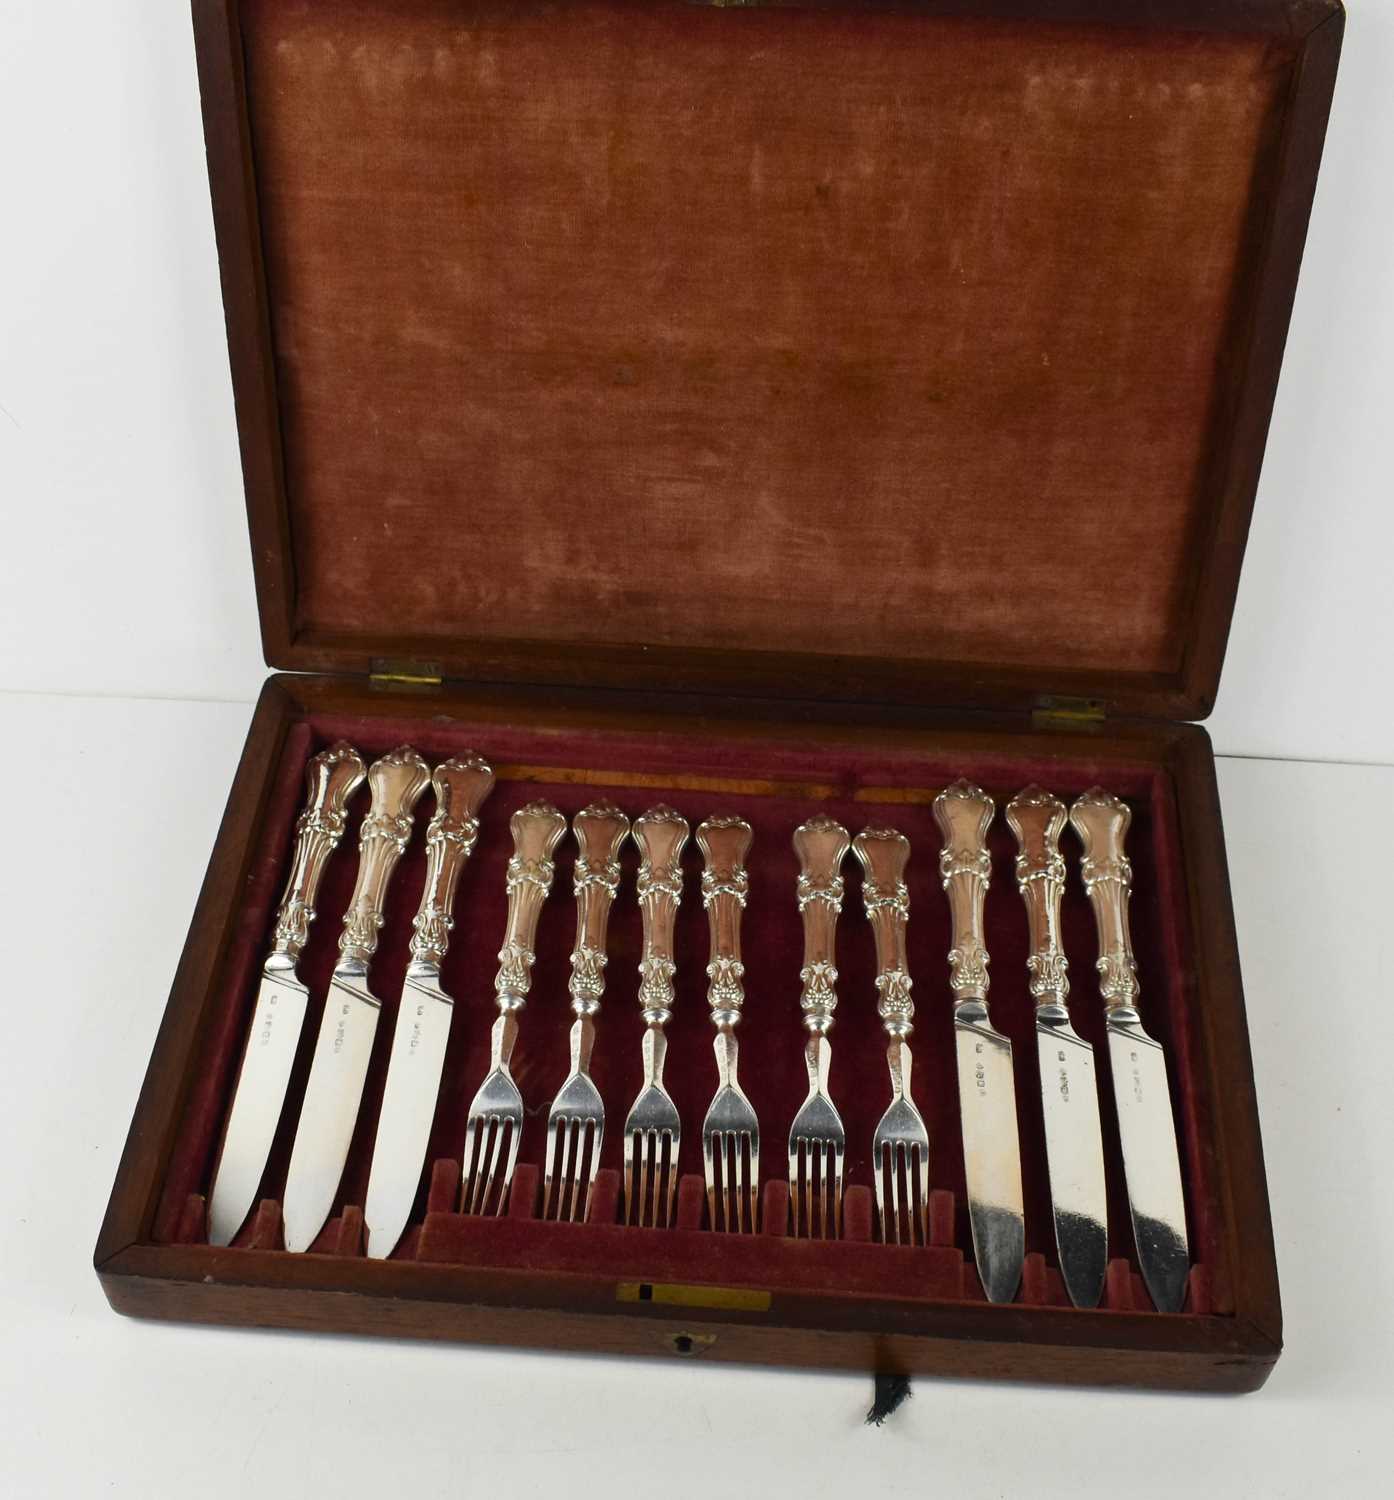 A 19th century set of silver handled knives and forks, six of each, in the original mahogany